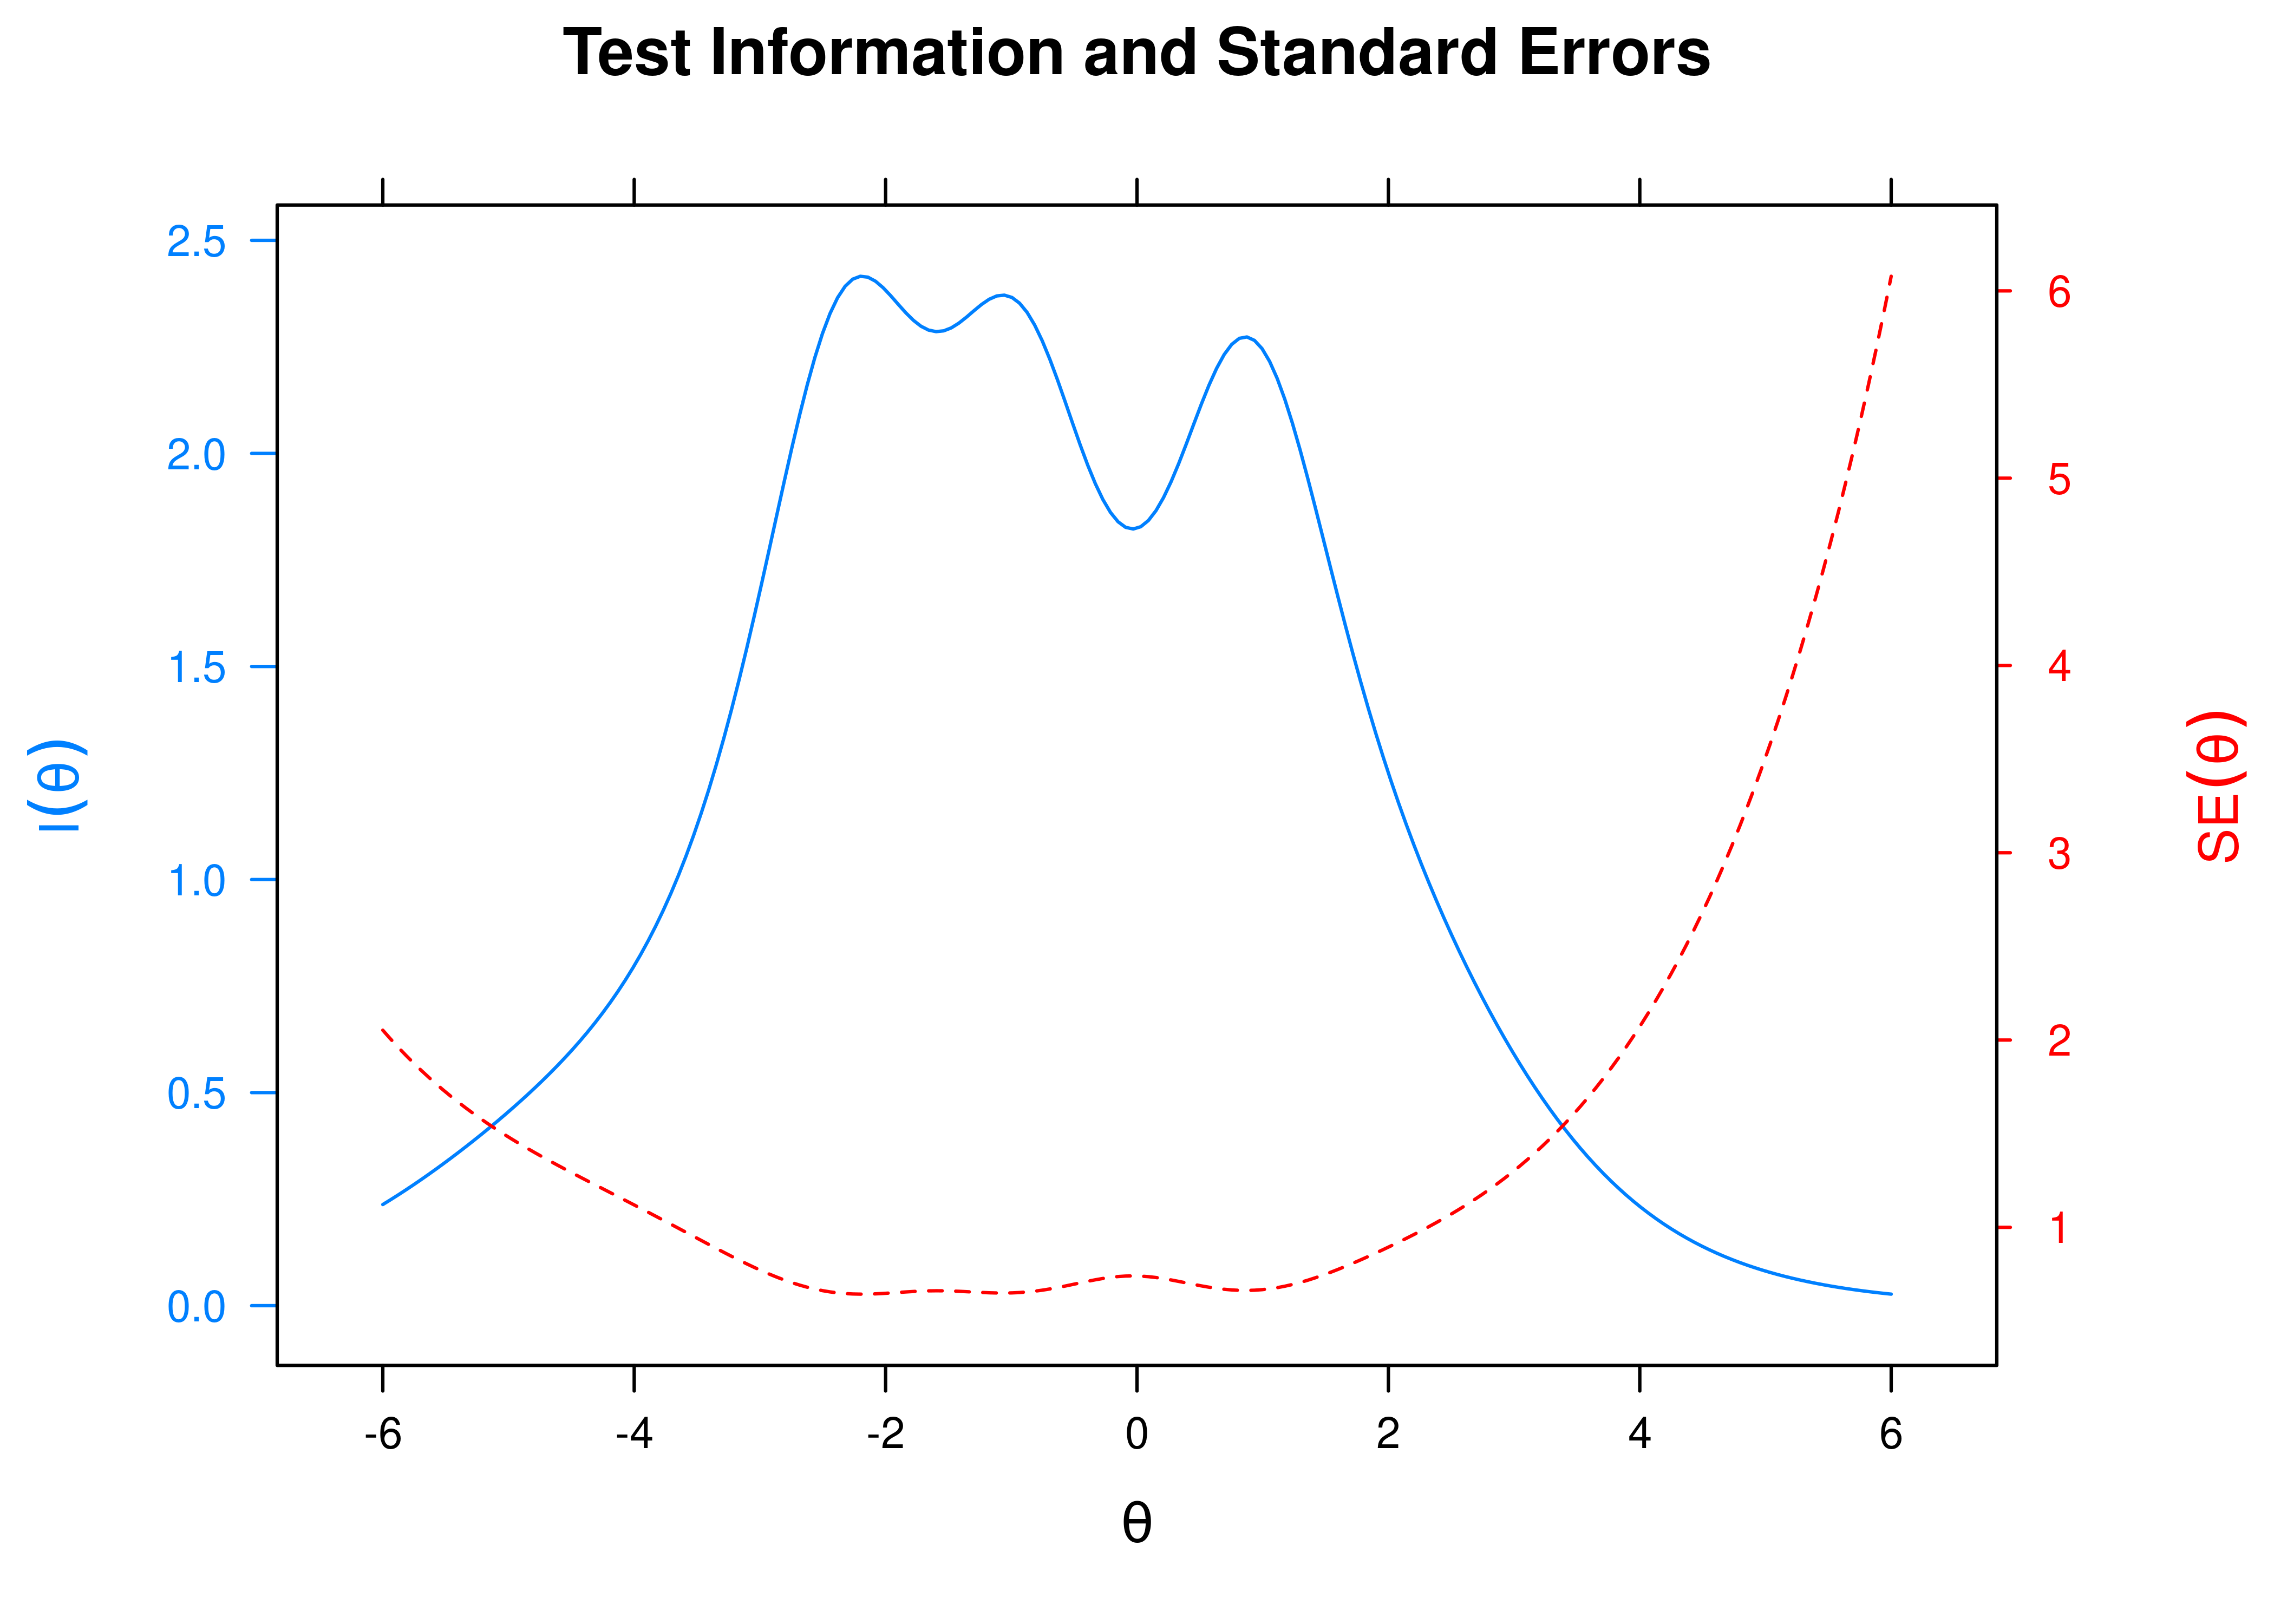 Test Information Curve and Standard Error of Measurement From Graded Response Model.